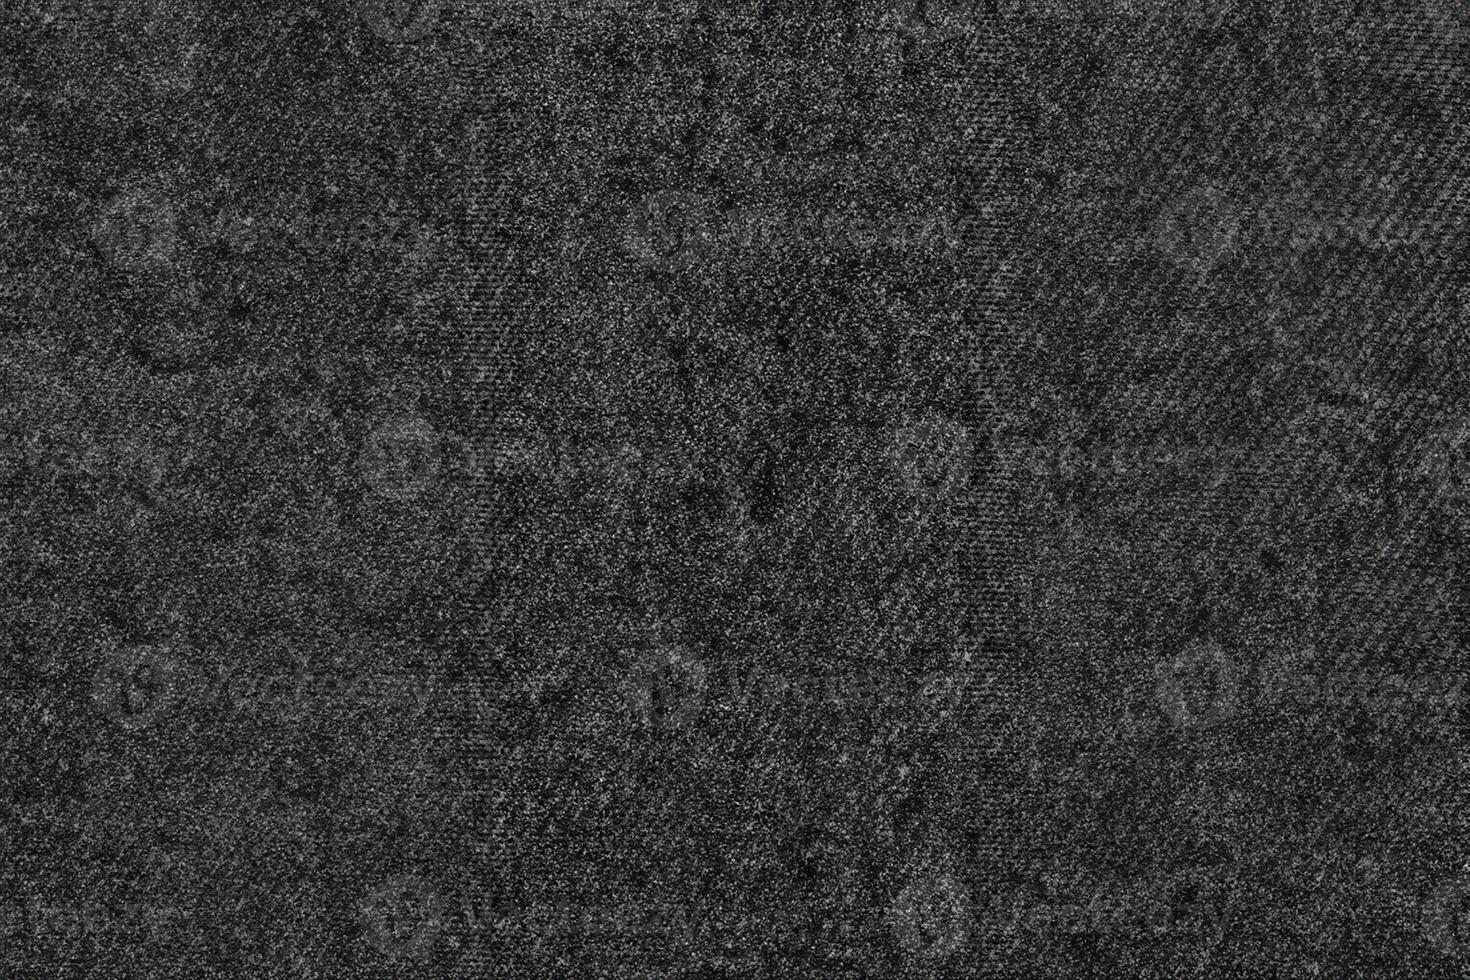 Cozy Knitted Wool Texture, Natural Black with Dark Gray Woven Cotton Canvas Background. photo